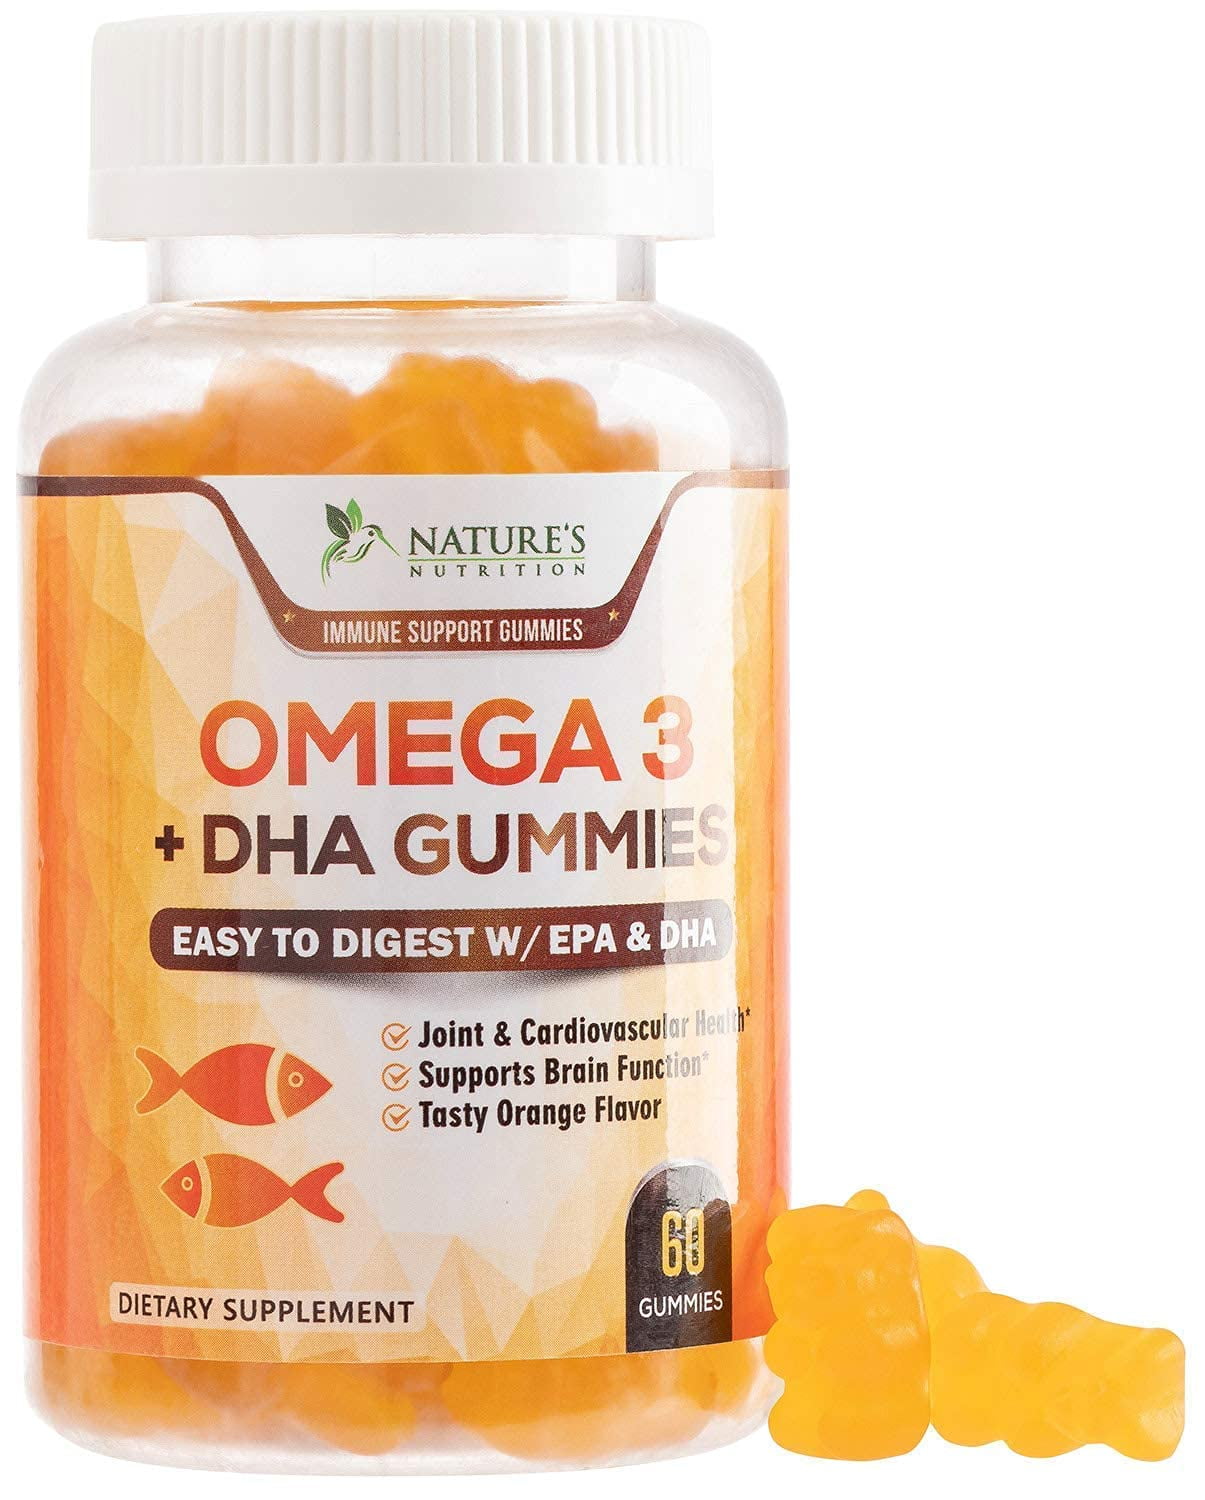 Omega 3 Fish Oil Gummies Tasty Natural Orange Flavor Extra Strength DHA & EPA - Natural Brain Support and Joints Support, Delicious Gummy Vitamin for Men & Women - 60 Gummies